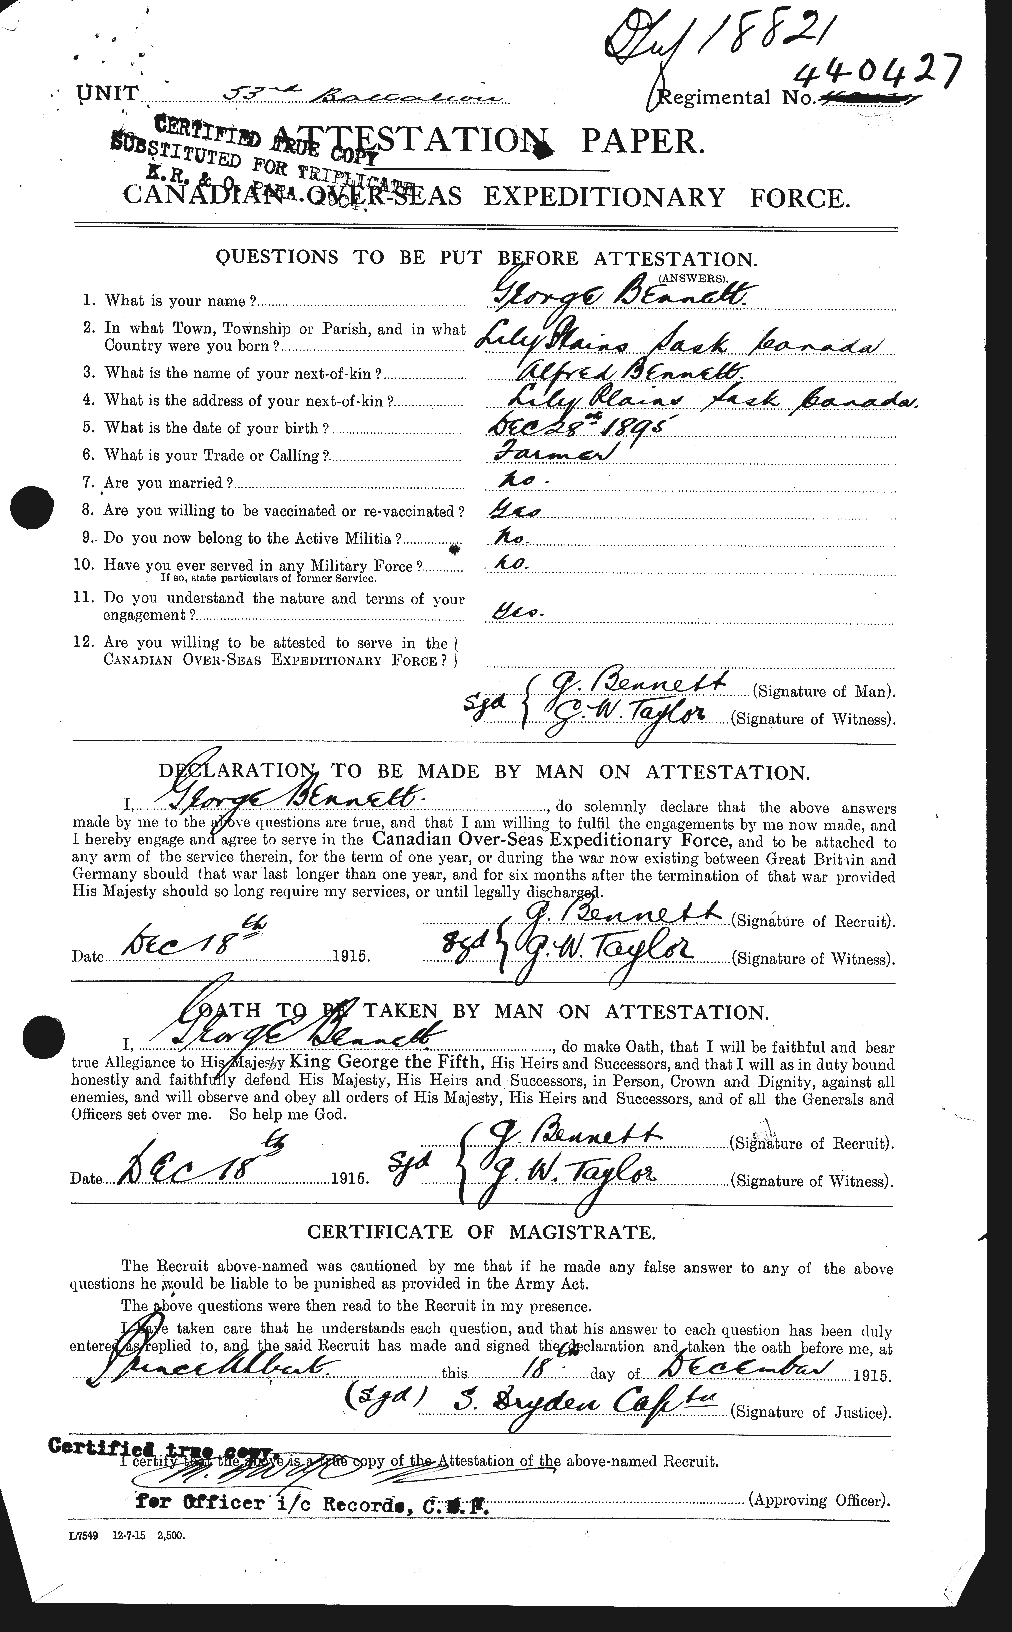 Personnel Records of the First World War - CEF 238395a